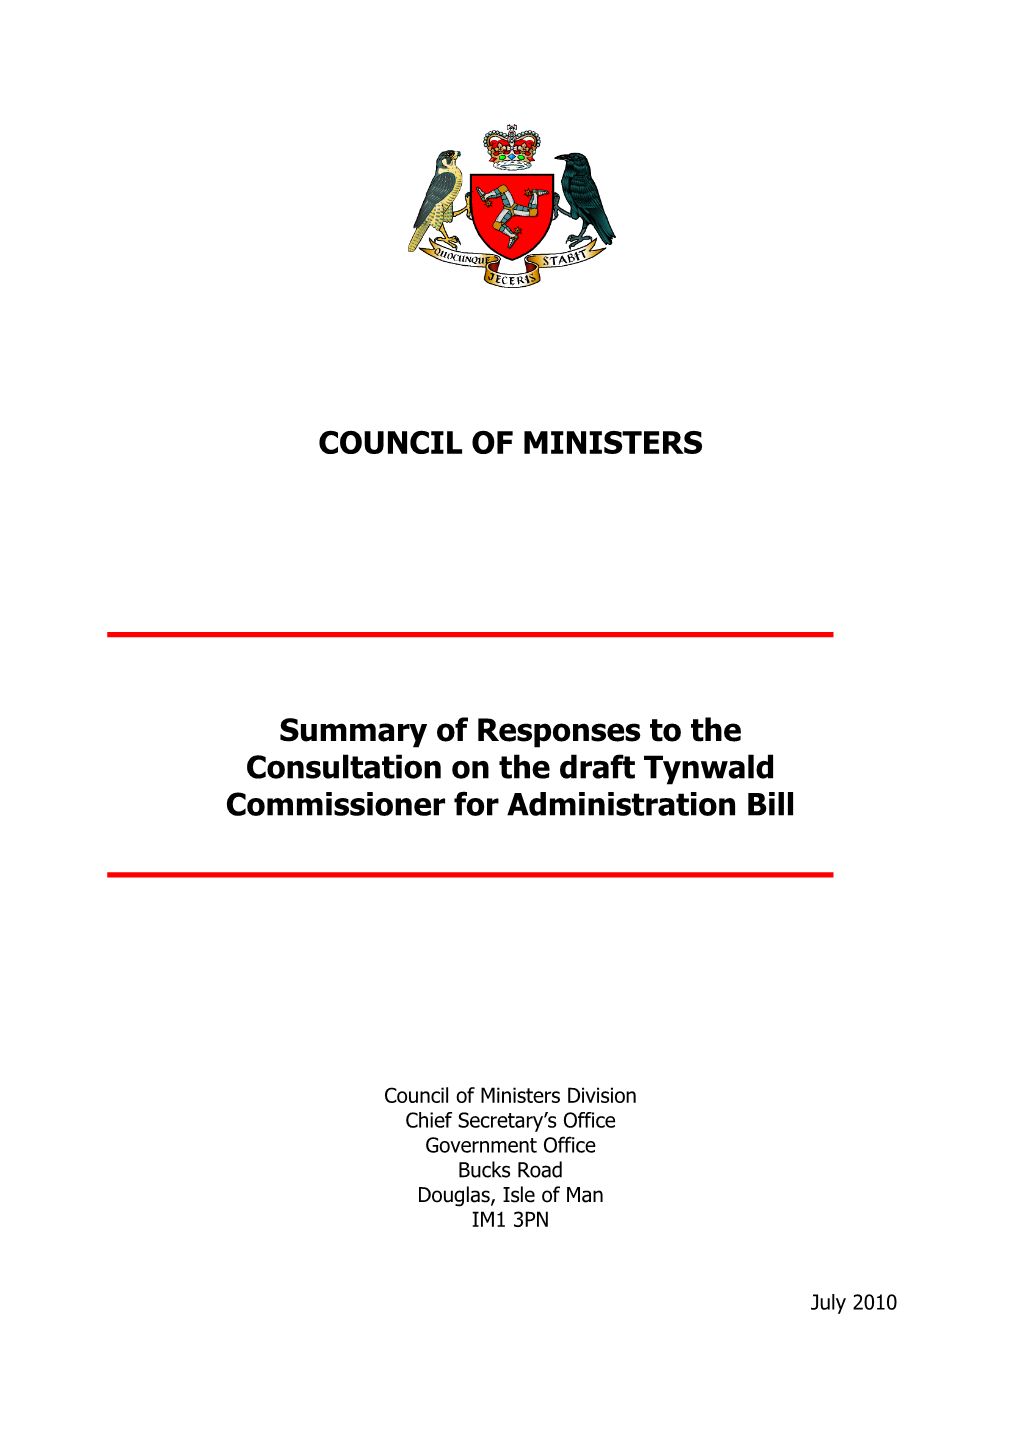 Summary of Responses to the Consultation on the Draft Tynwald Commissioner for Administration Bill